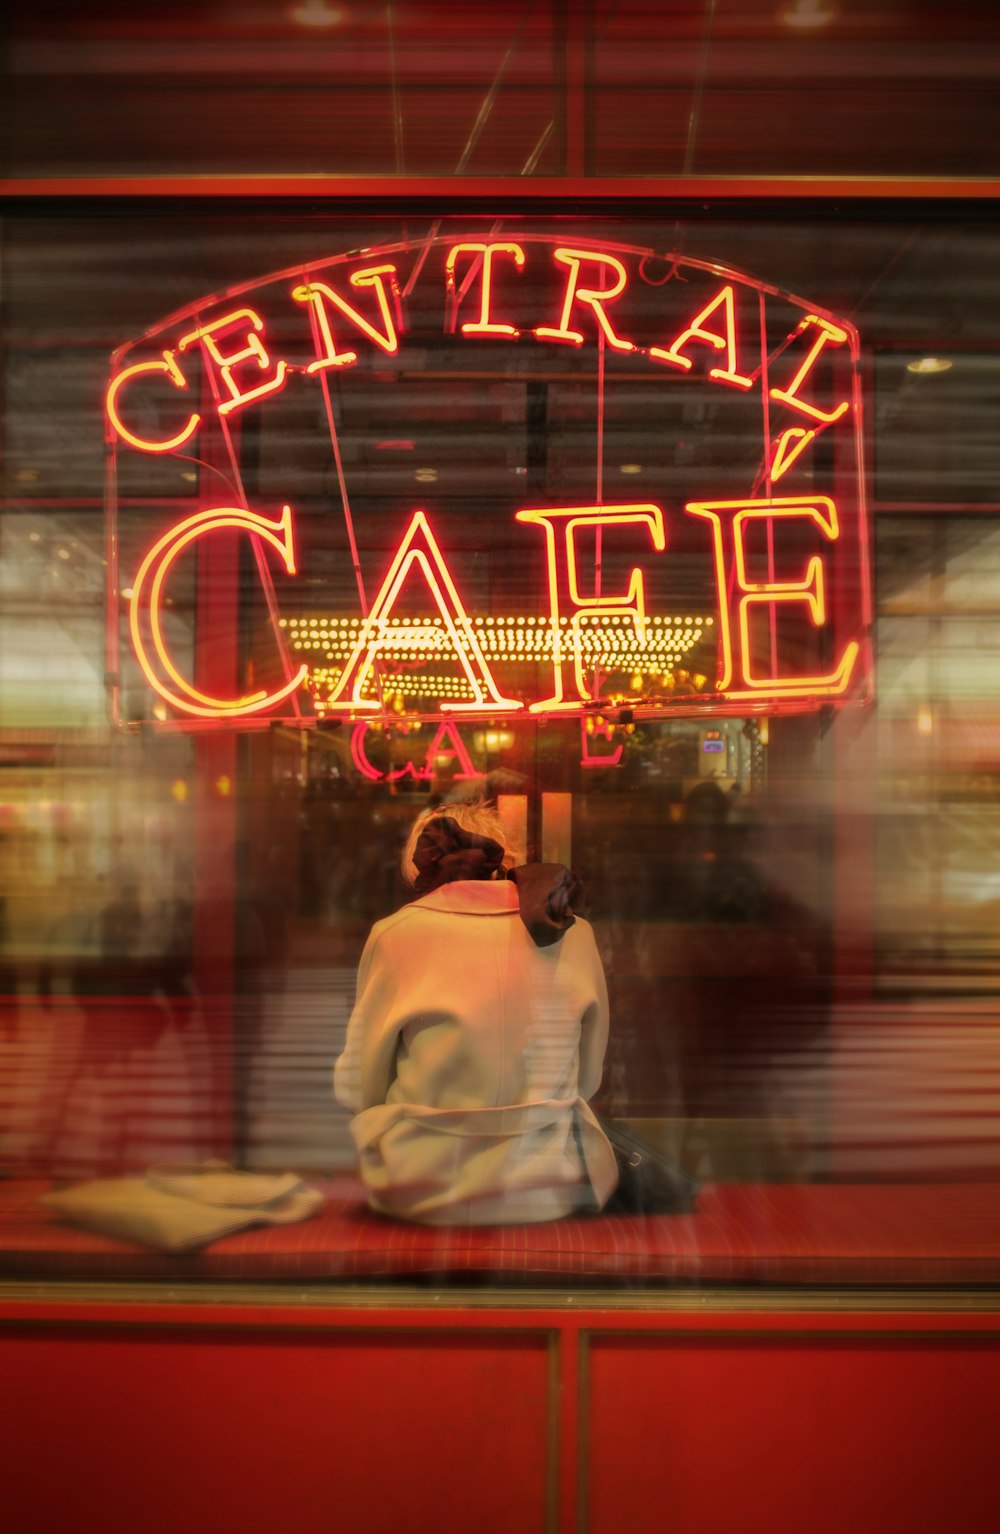 Central Cafe neon sign